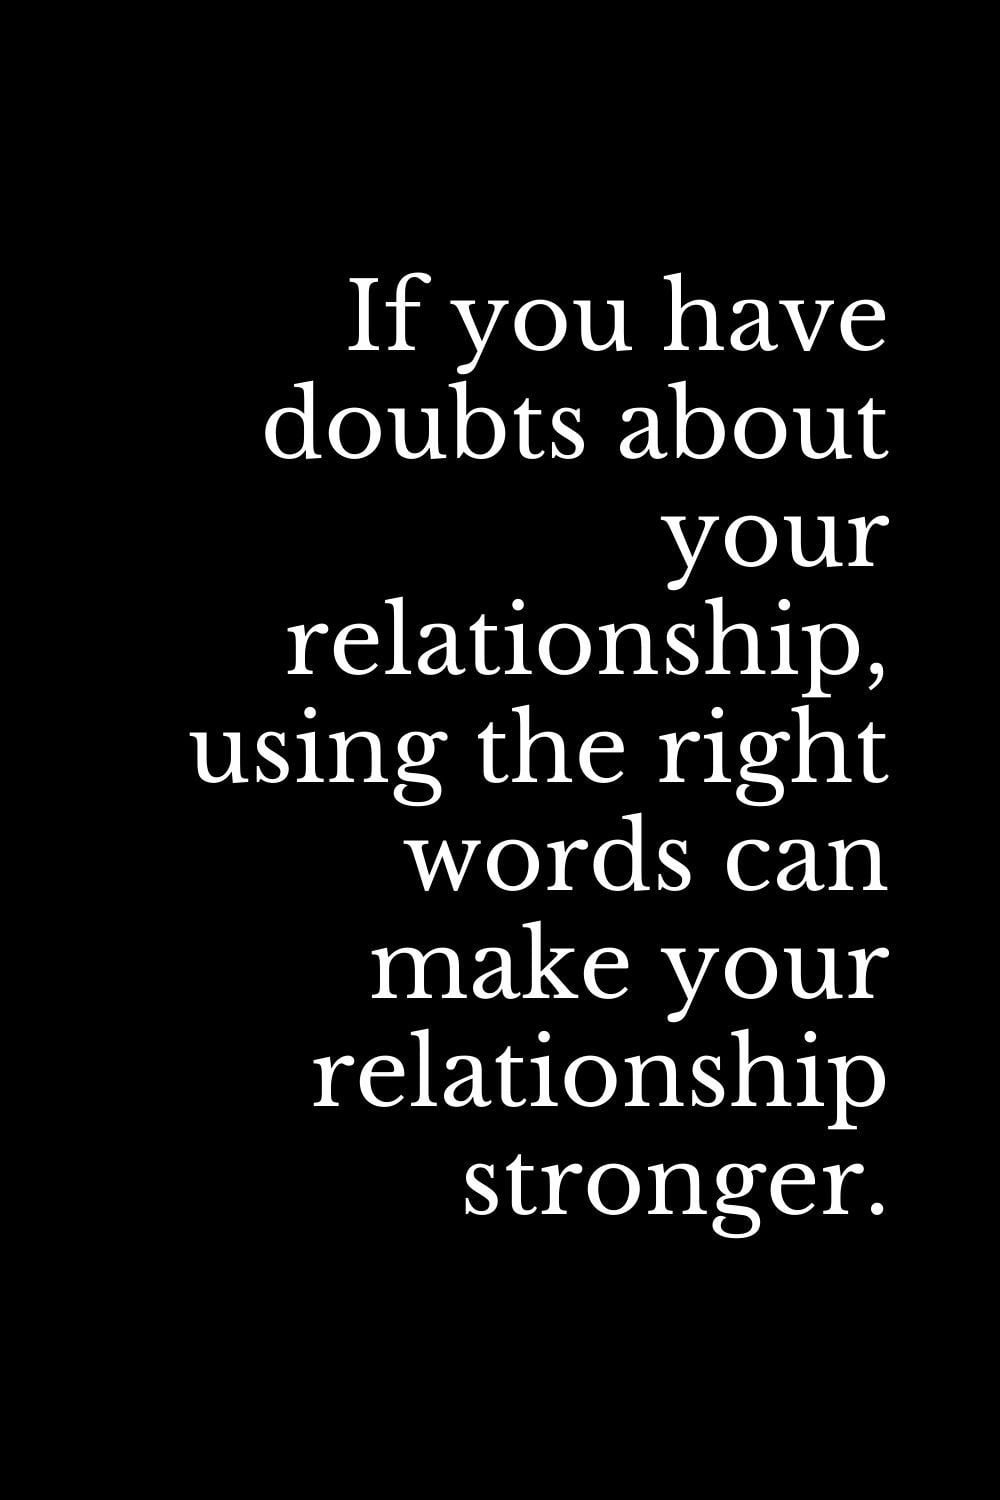 What to Do If You are Doubting Your Relationship